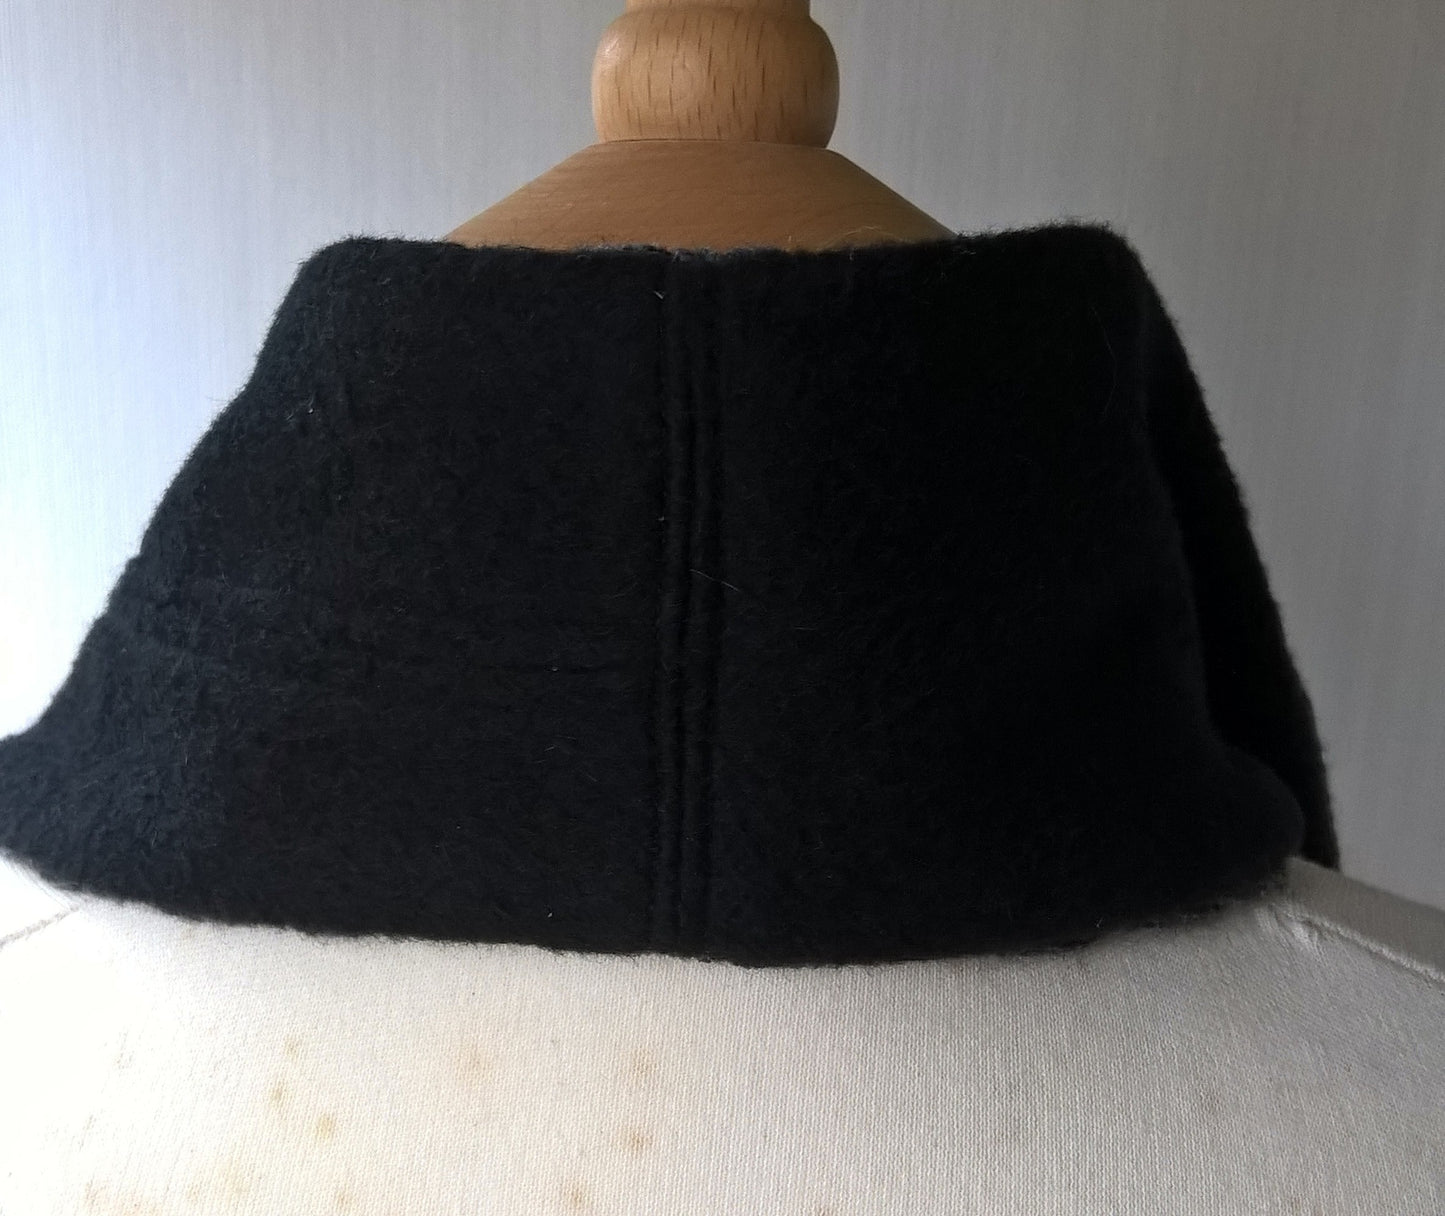 Black cashmere keyhole scarf with grey knitted lining